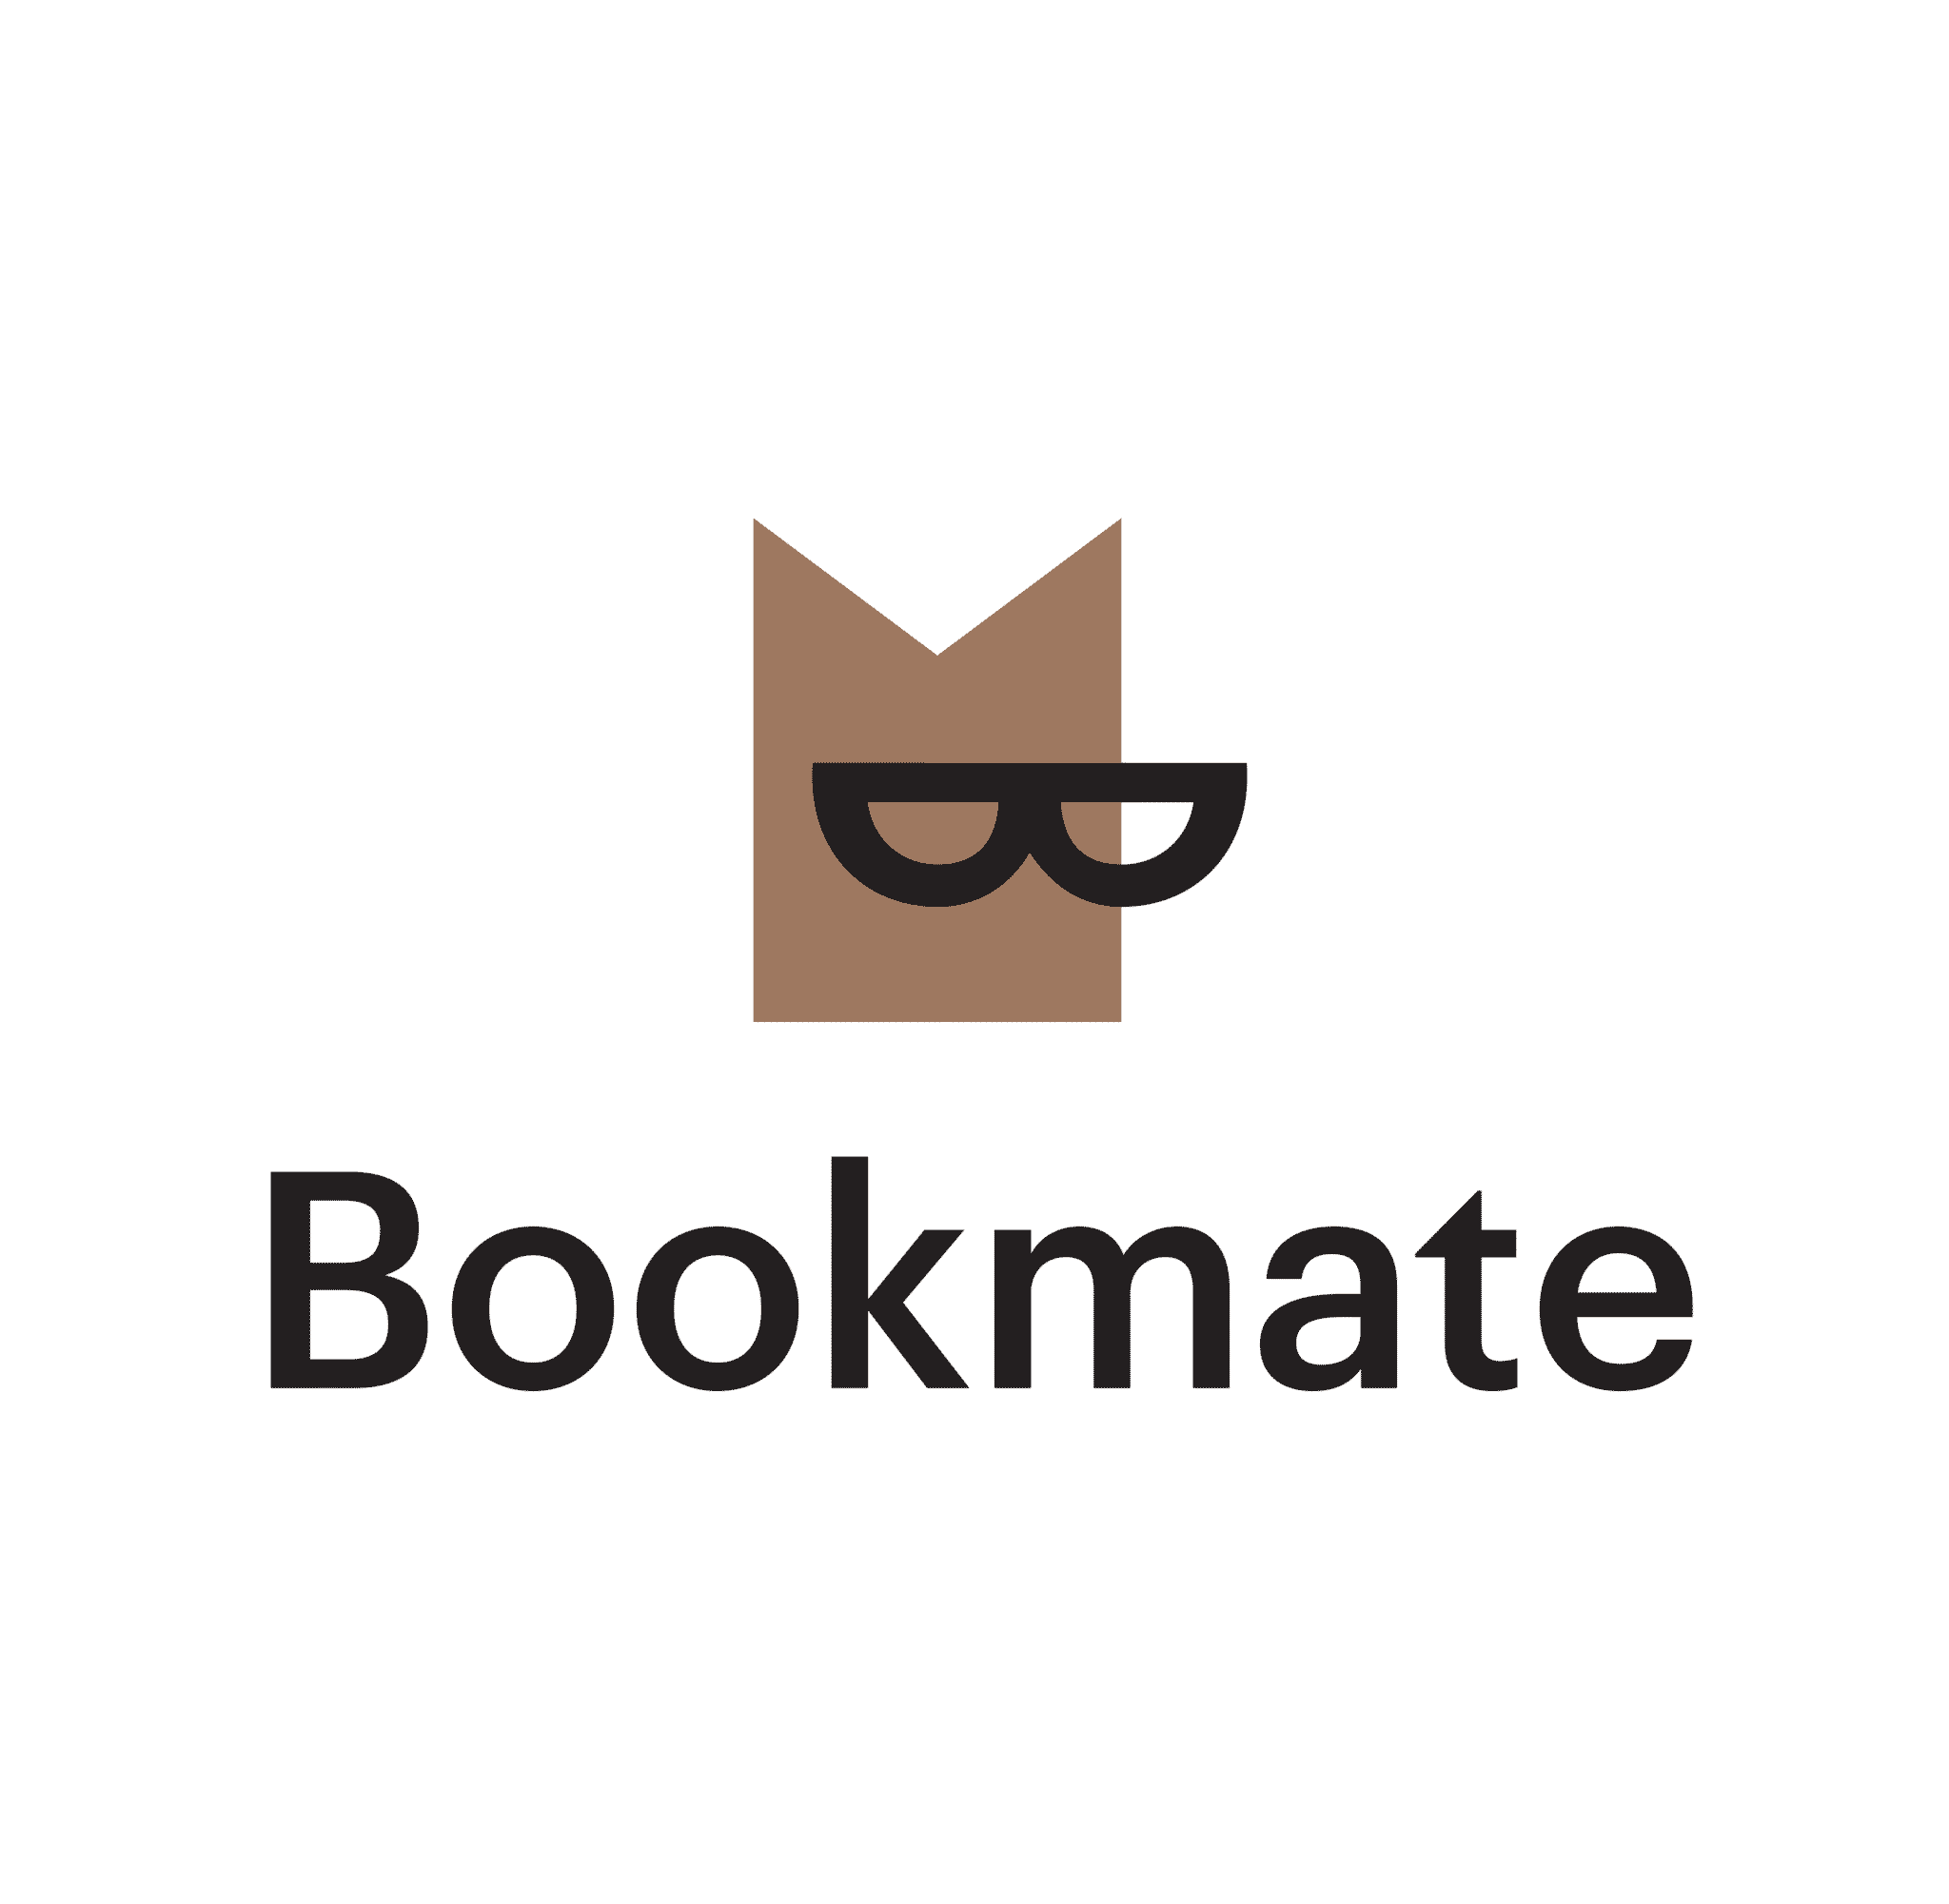 Bookmate Statistics and Facts 2022